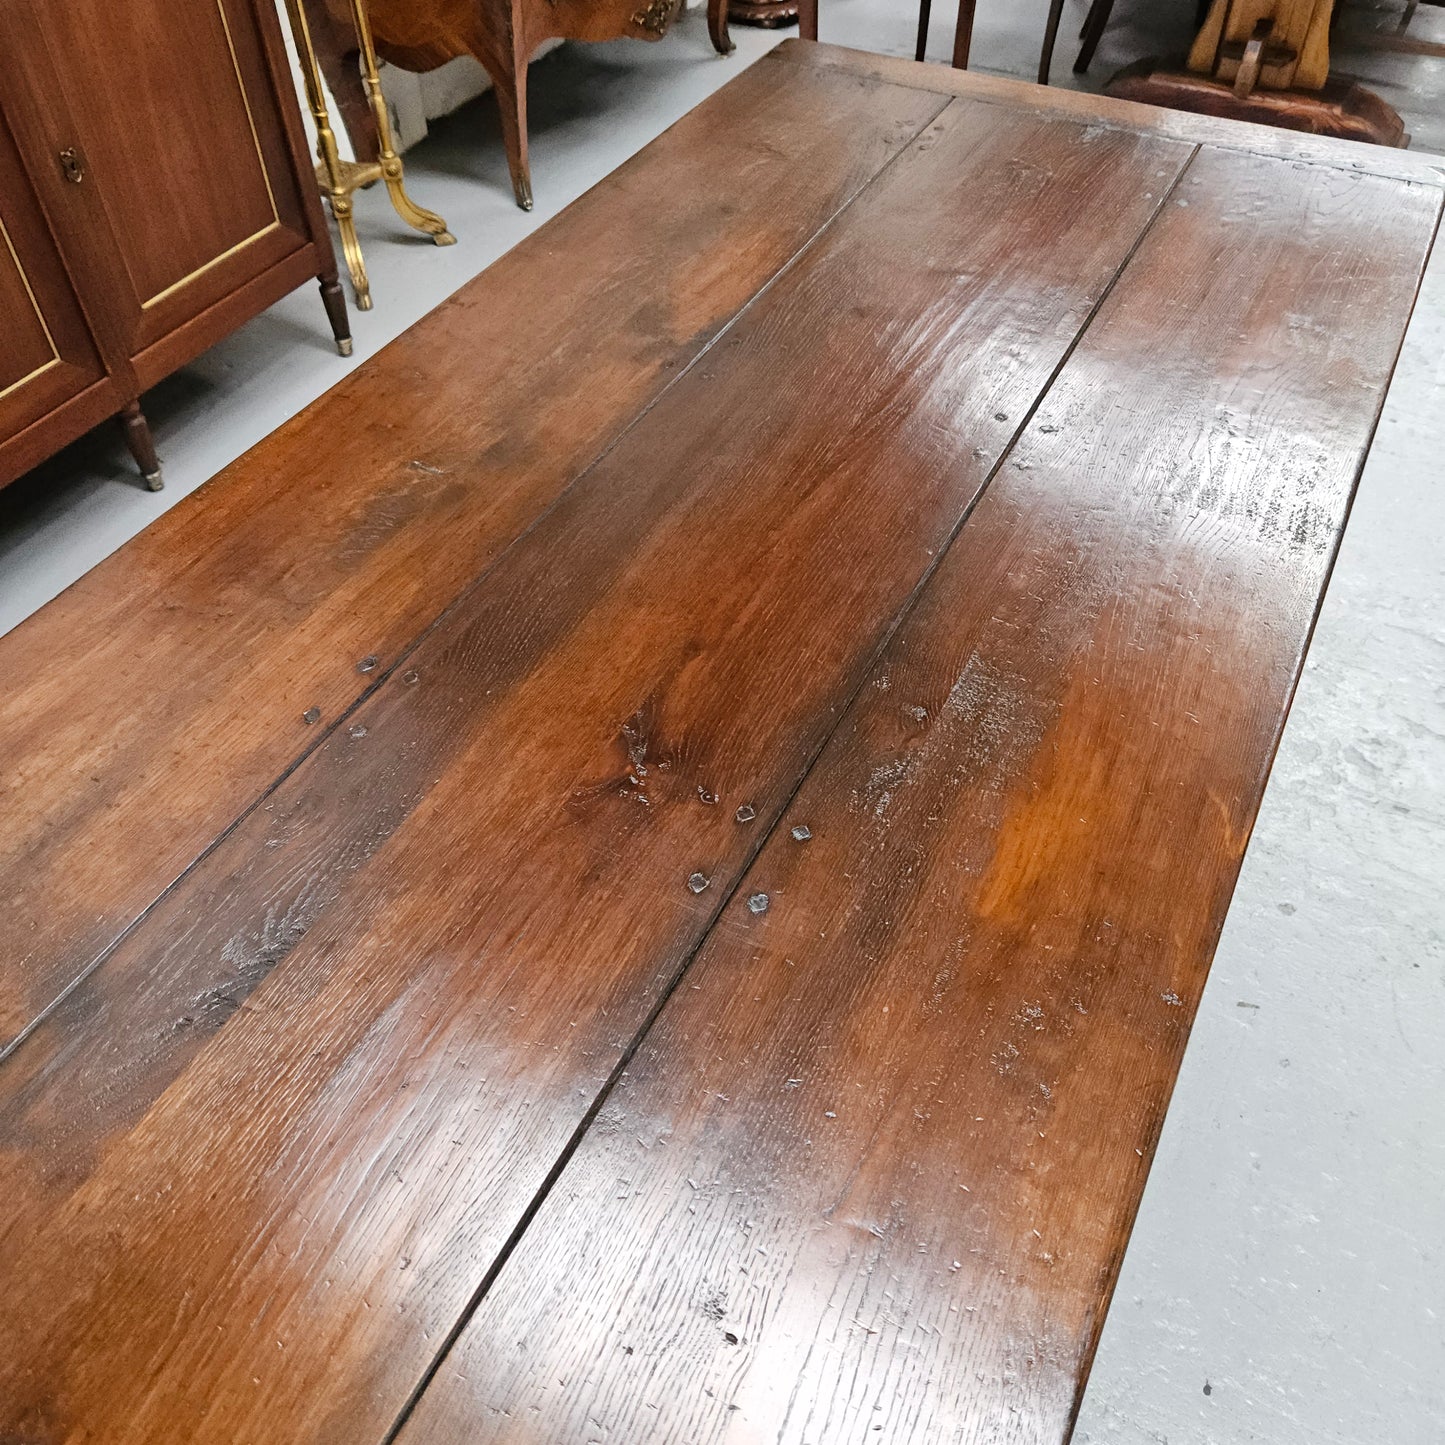 Stunning stretcher base reclaimed antique timbers farmhouse dining table with two extension leaves that can be added to either side. Sourced directly from France and is in good original detailed condition.